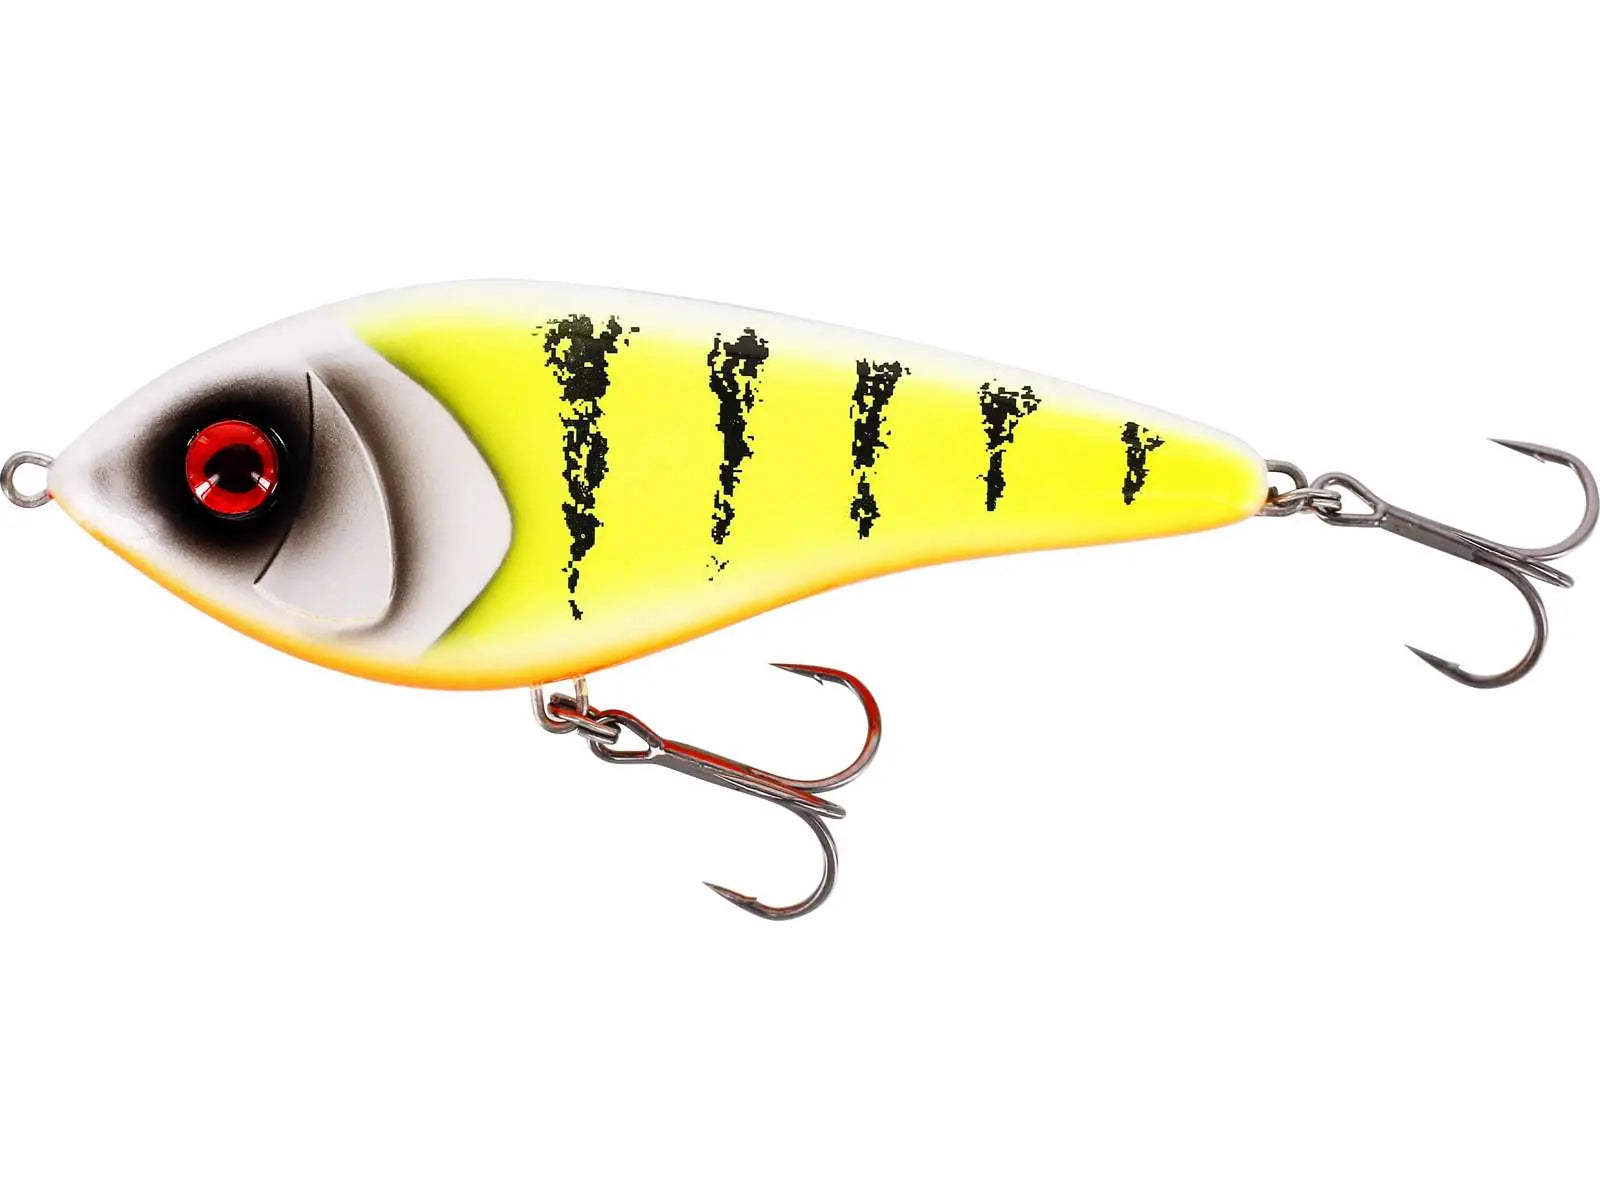 Buy ADD-IT SPINNERBAIT WILLOW at Westin Fishing